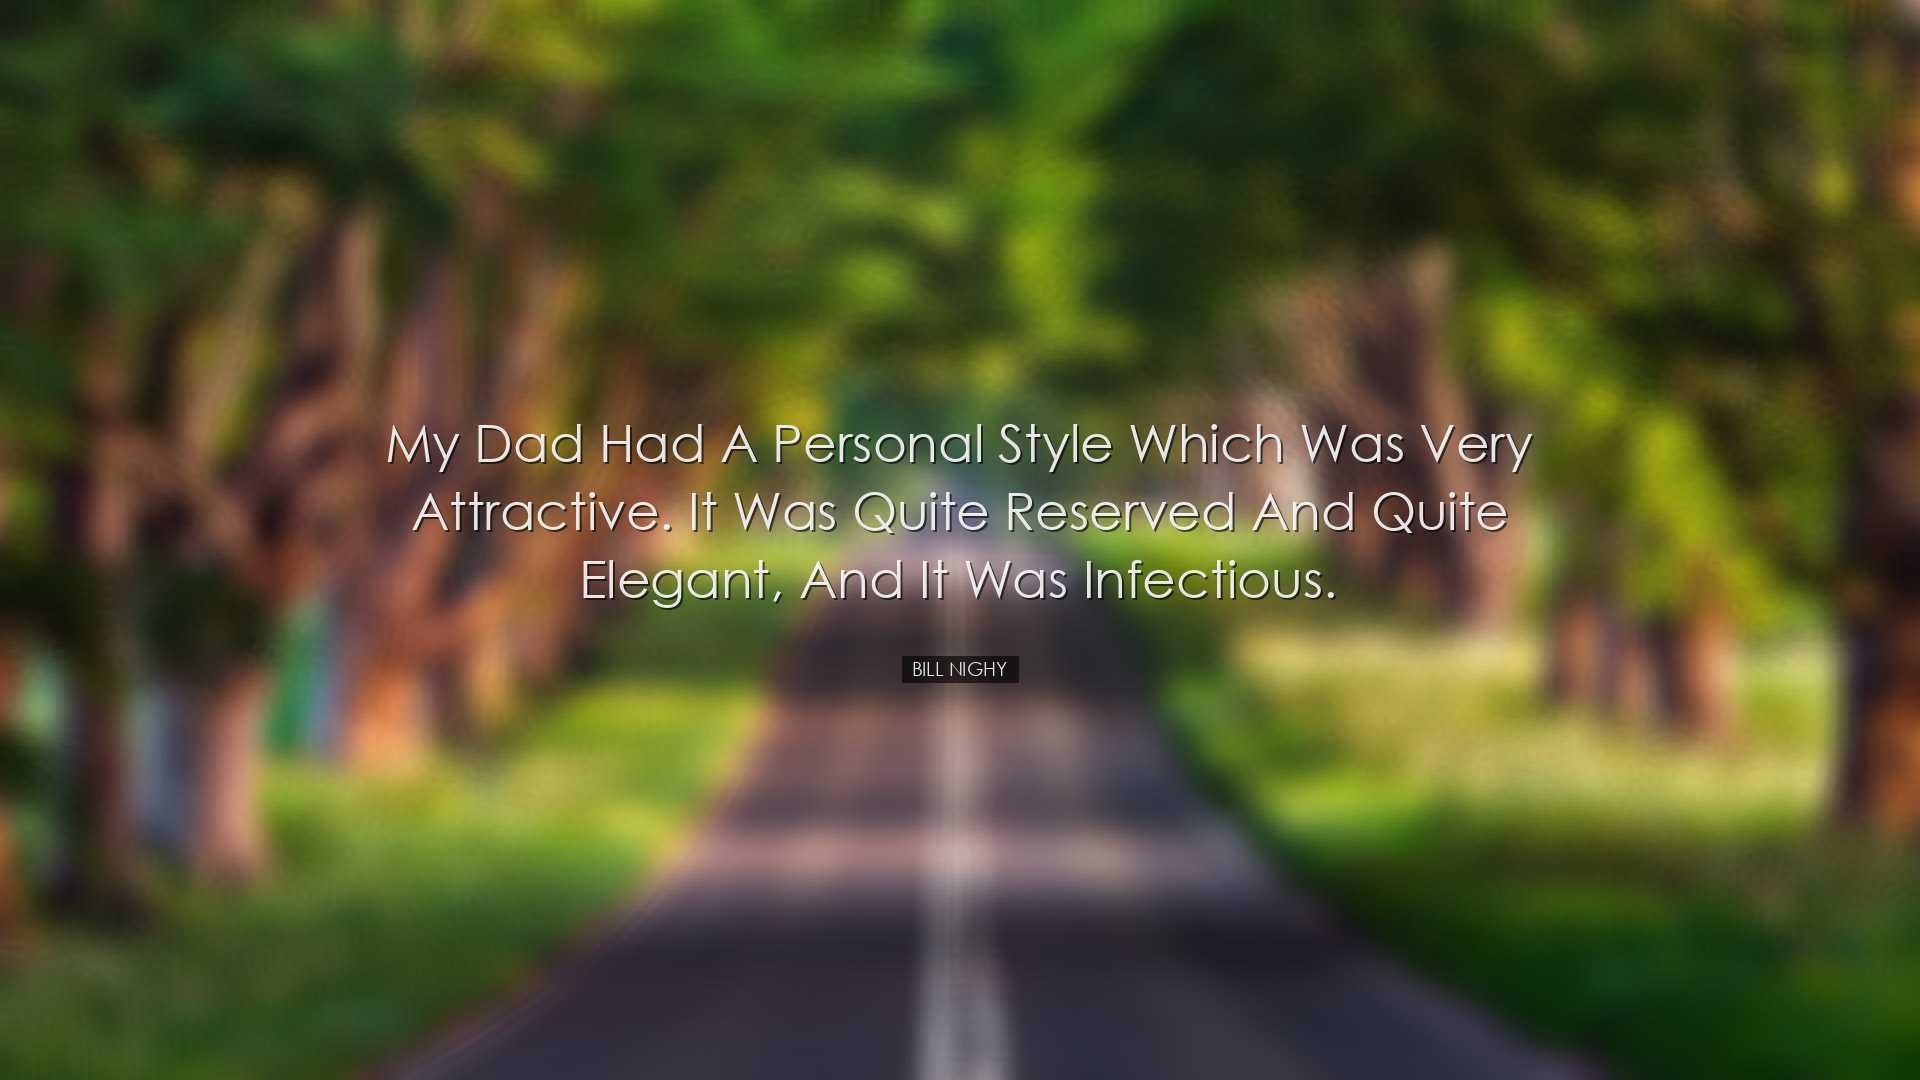 My dad had a personal style which was very attractive. It was quit